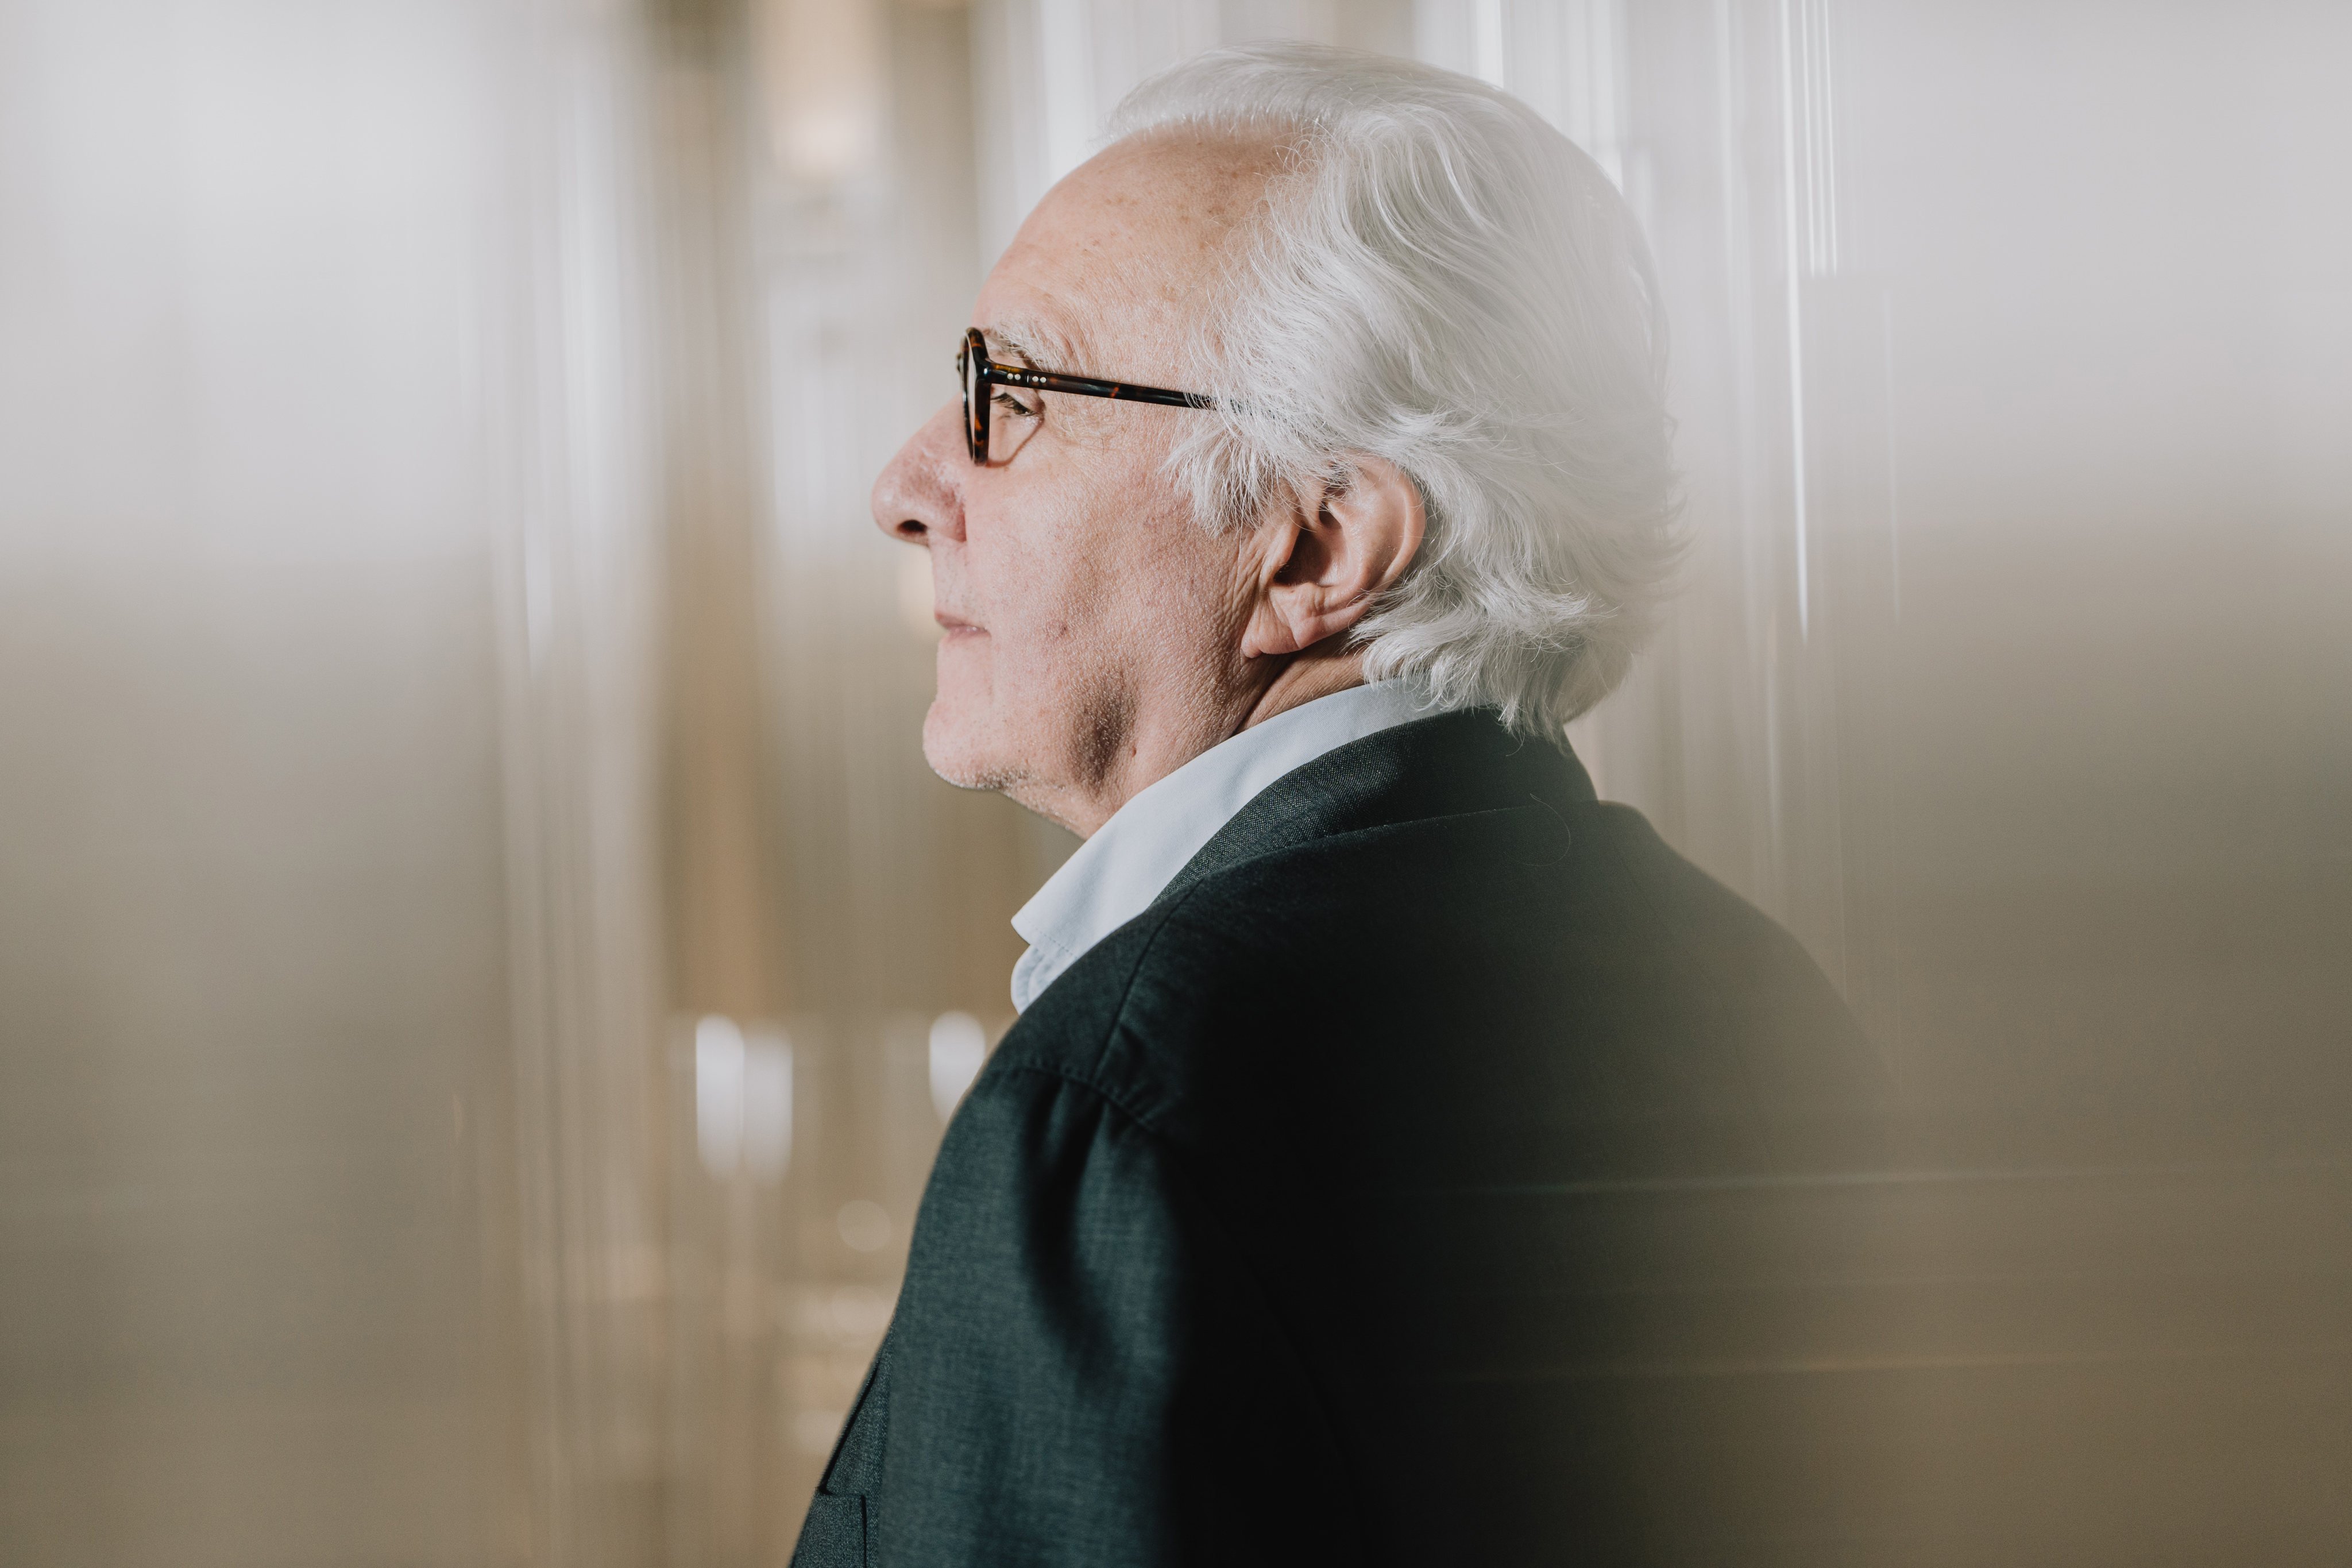 French chef-restaurateur Alain Ducasse wants a third Michelin star for his restaurant in Macau and has no plans to open another Hong Kong restaurant. But ‘never say never’, he adds. Photo: Alain Ducasse at Morpheus